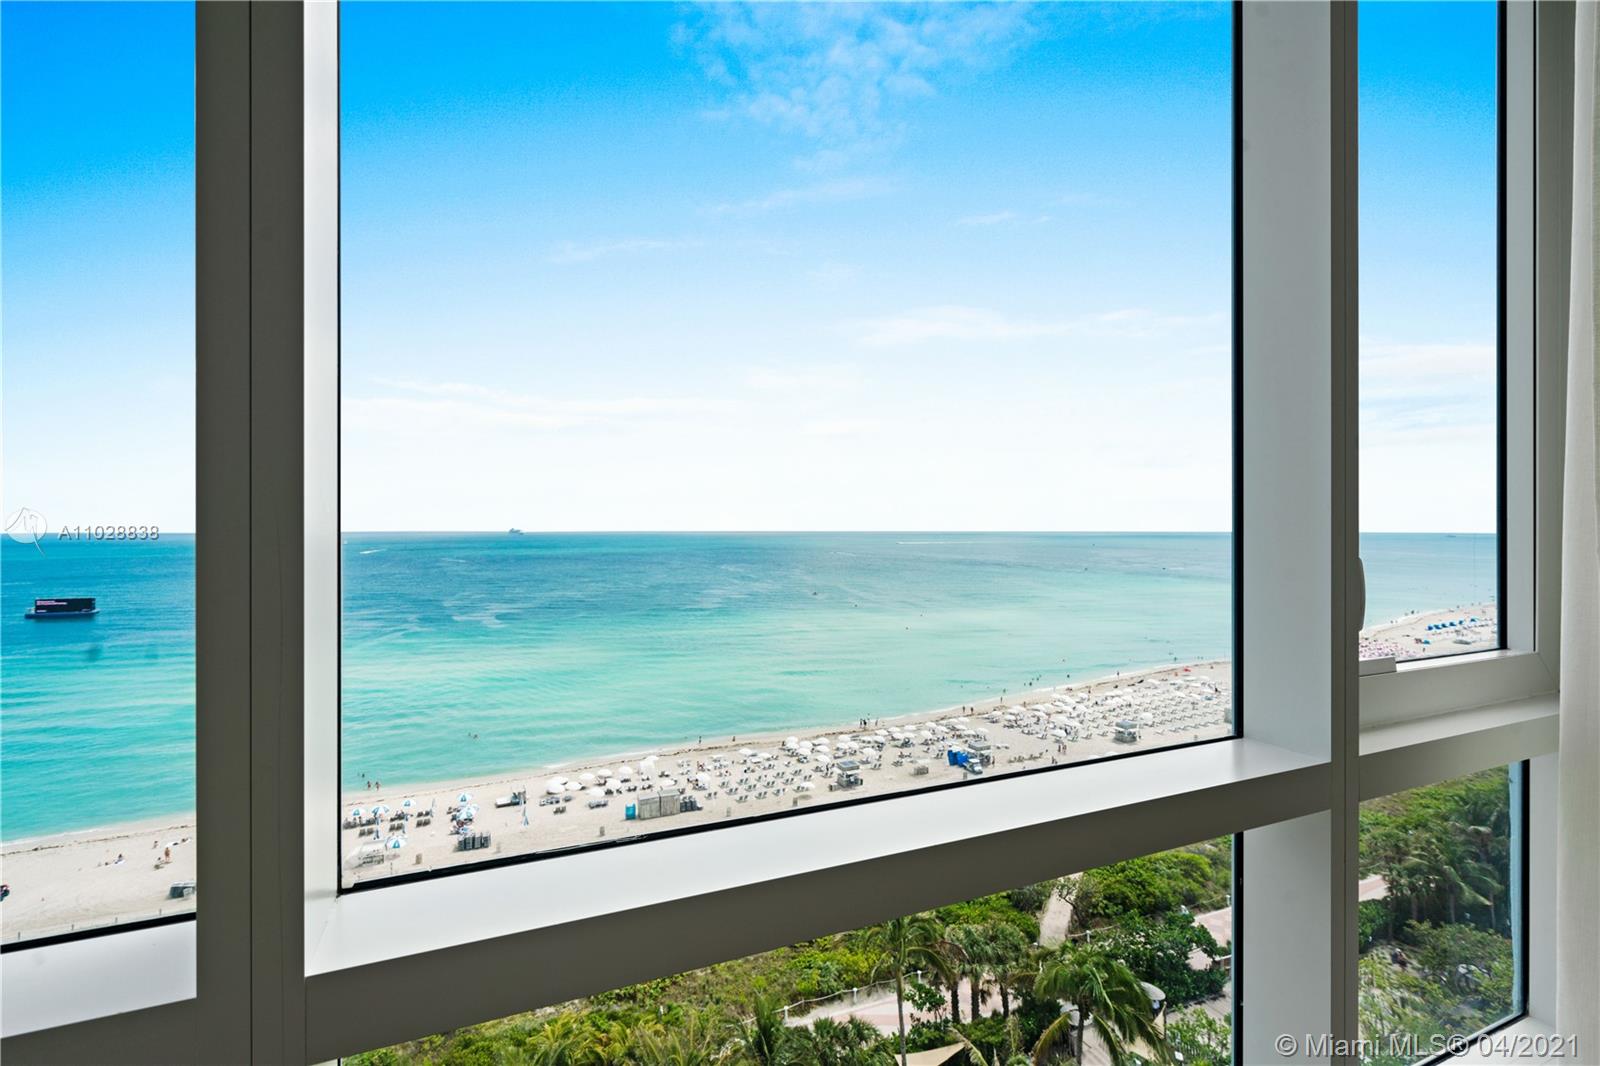 This beachfront private residence, located inside South Beach’s eco-conscious 1 Hotel & Homes, is the perfect choice for that family vacation. Positioned on the Atlantic Oceanfront with 600-feet of direct beach access. This luxurious unit has a direct ocean view, environmentally friendly features & thoughtful touches throughout create a fusion of luxury and environmental consciousness. Enjoy the amenities of a 5-star resort with all the comforts of home.